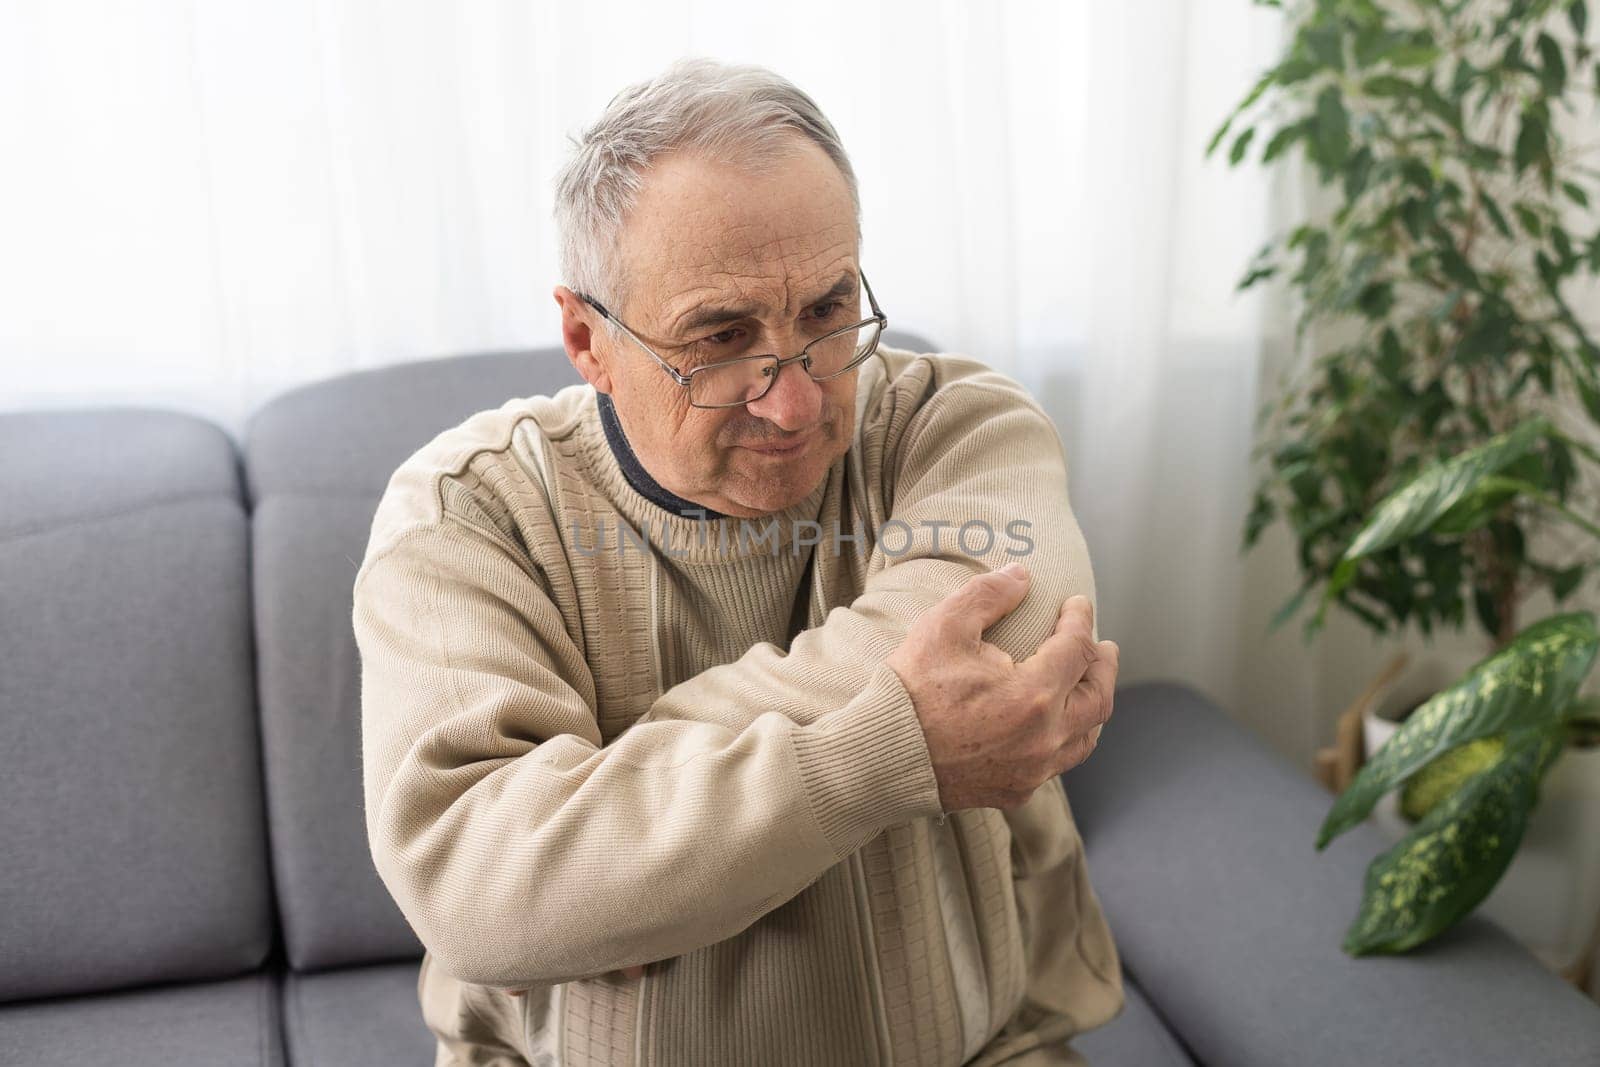 an elderly man hurts his elbow by Andelov13